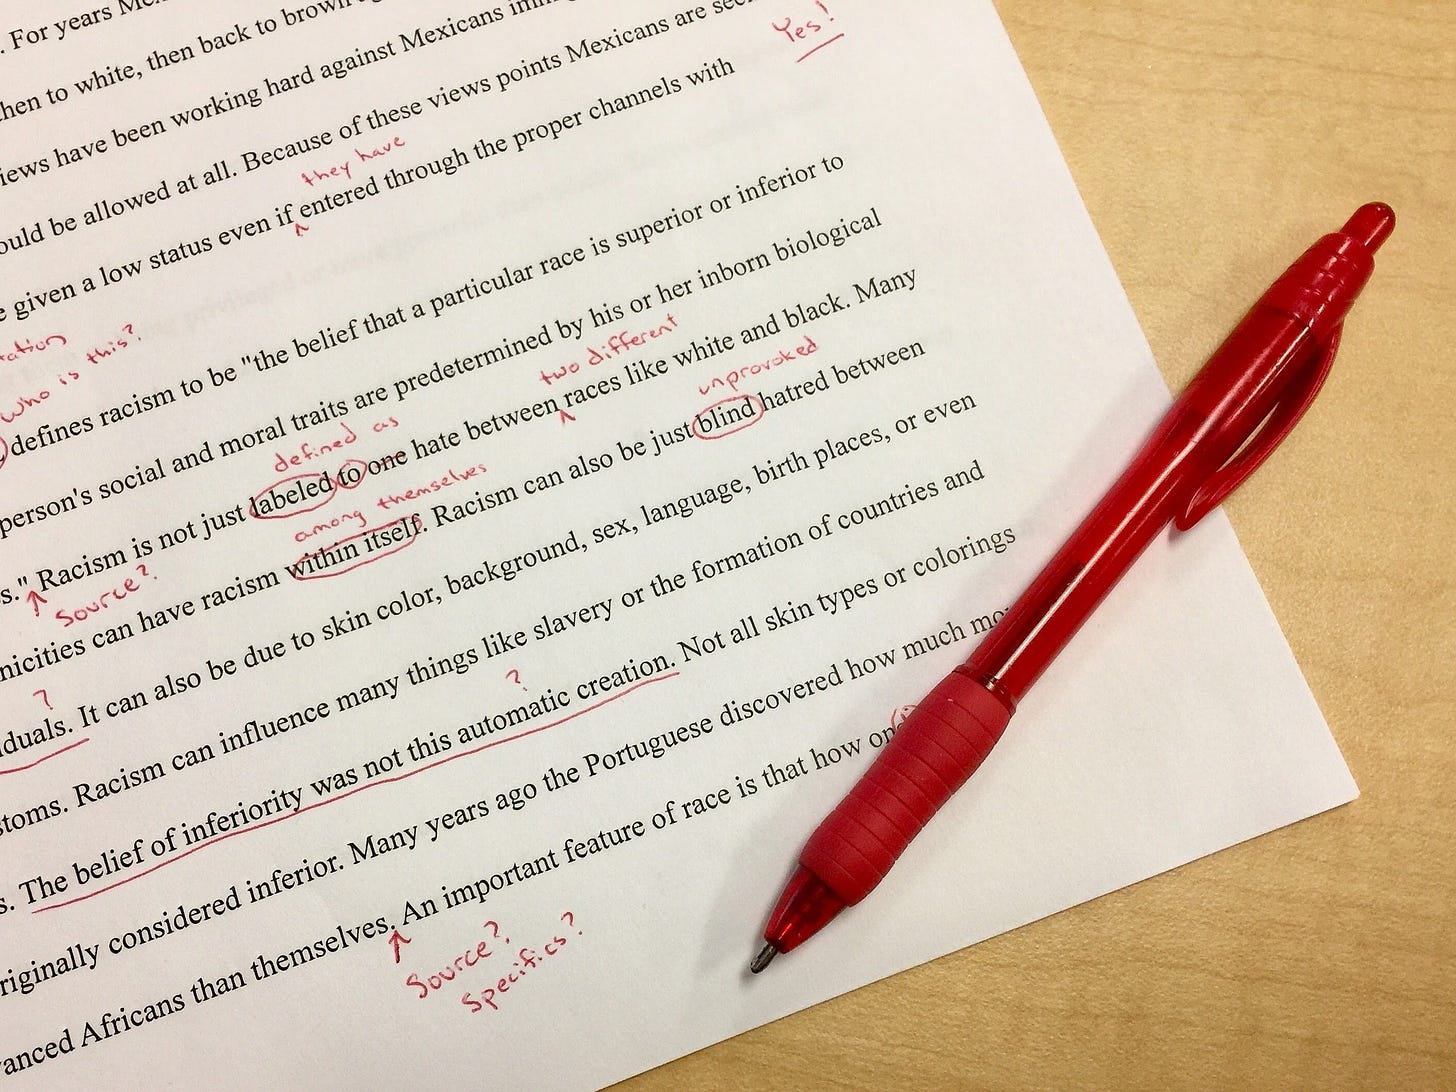 paper with comments written in red ink, sitting on a desk with a with red pen